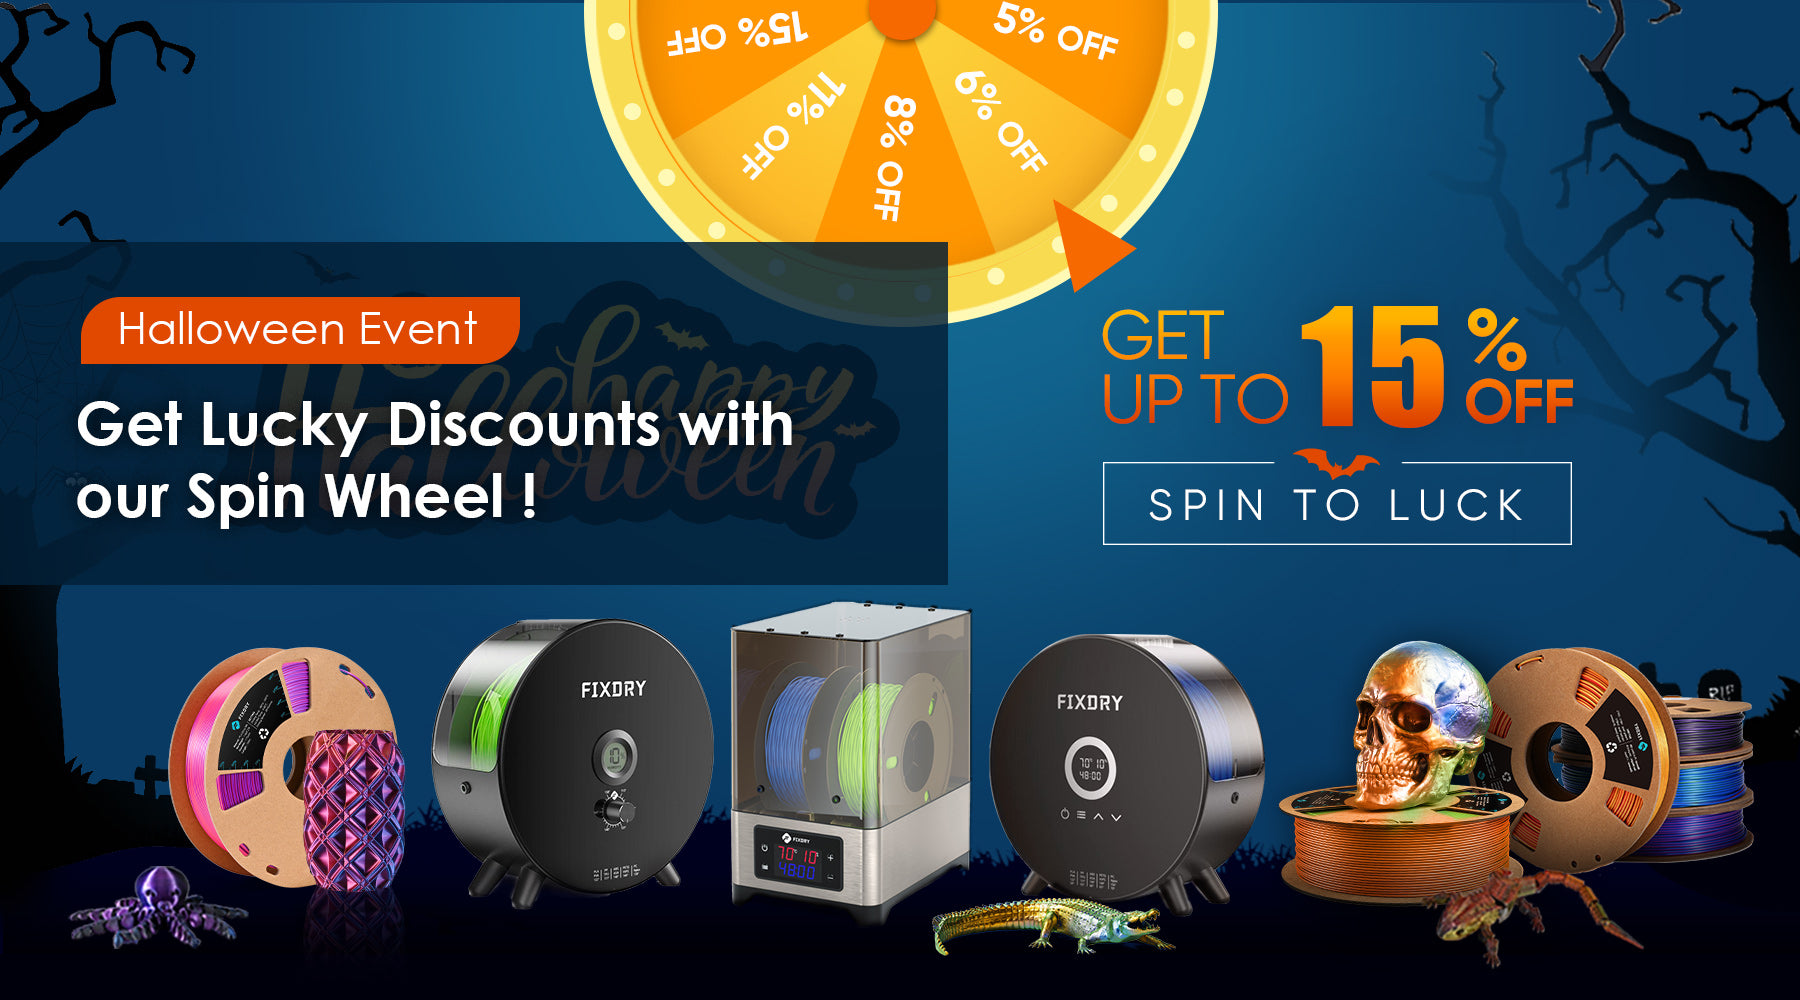 Halloween Event - Get Lucky Discounts with our Spin Wheel!